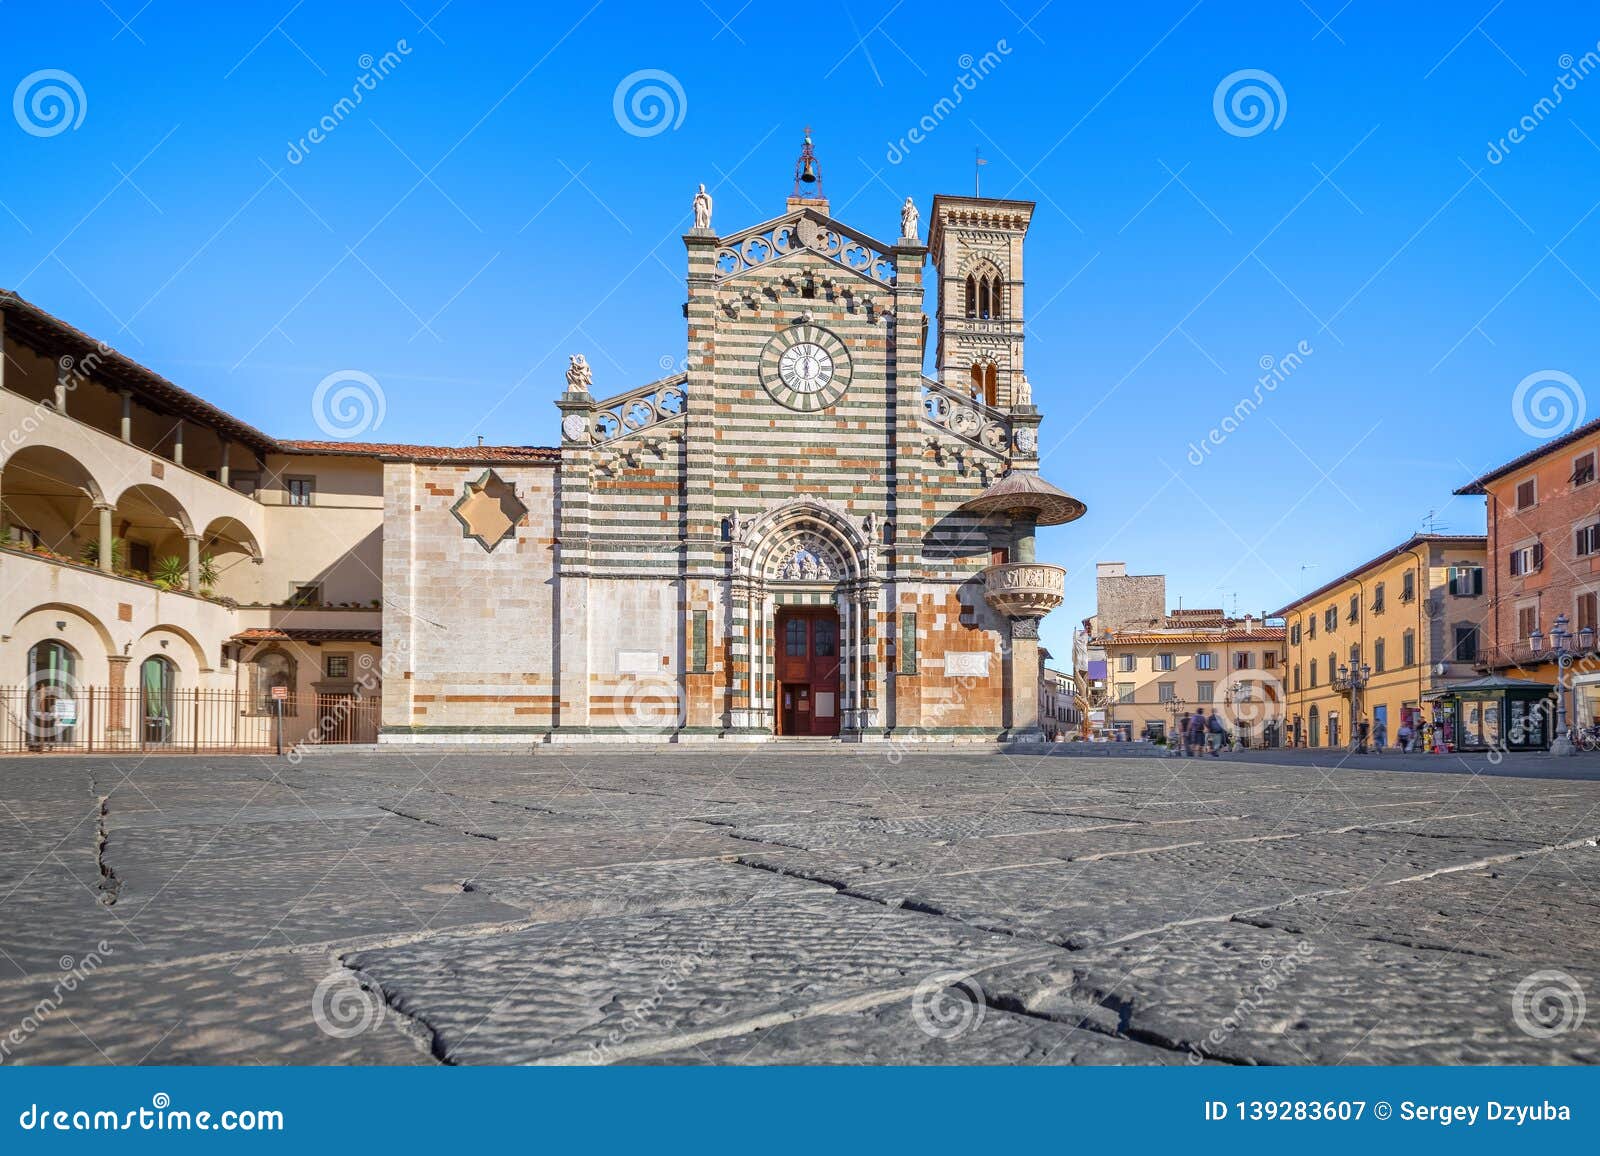 cathedral of santo stefano in prato, italy